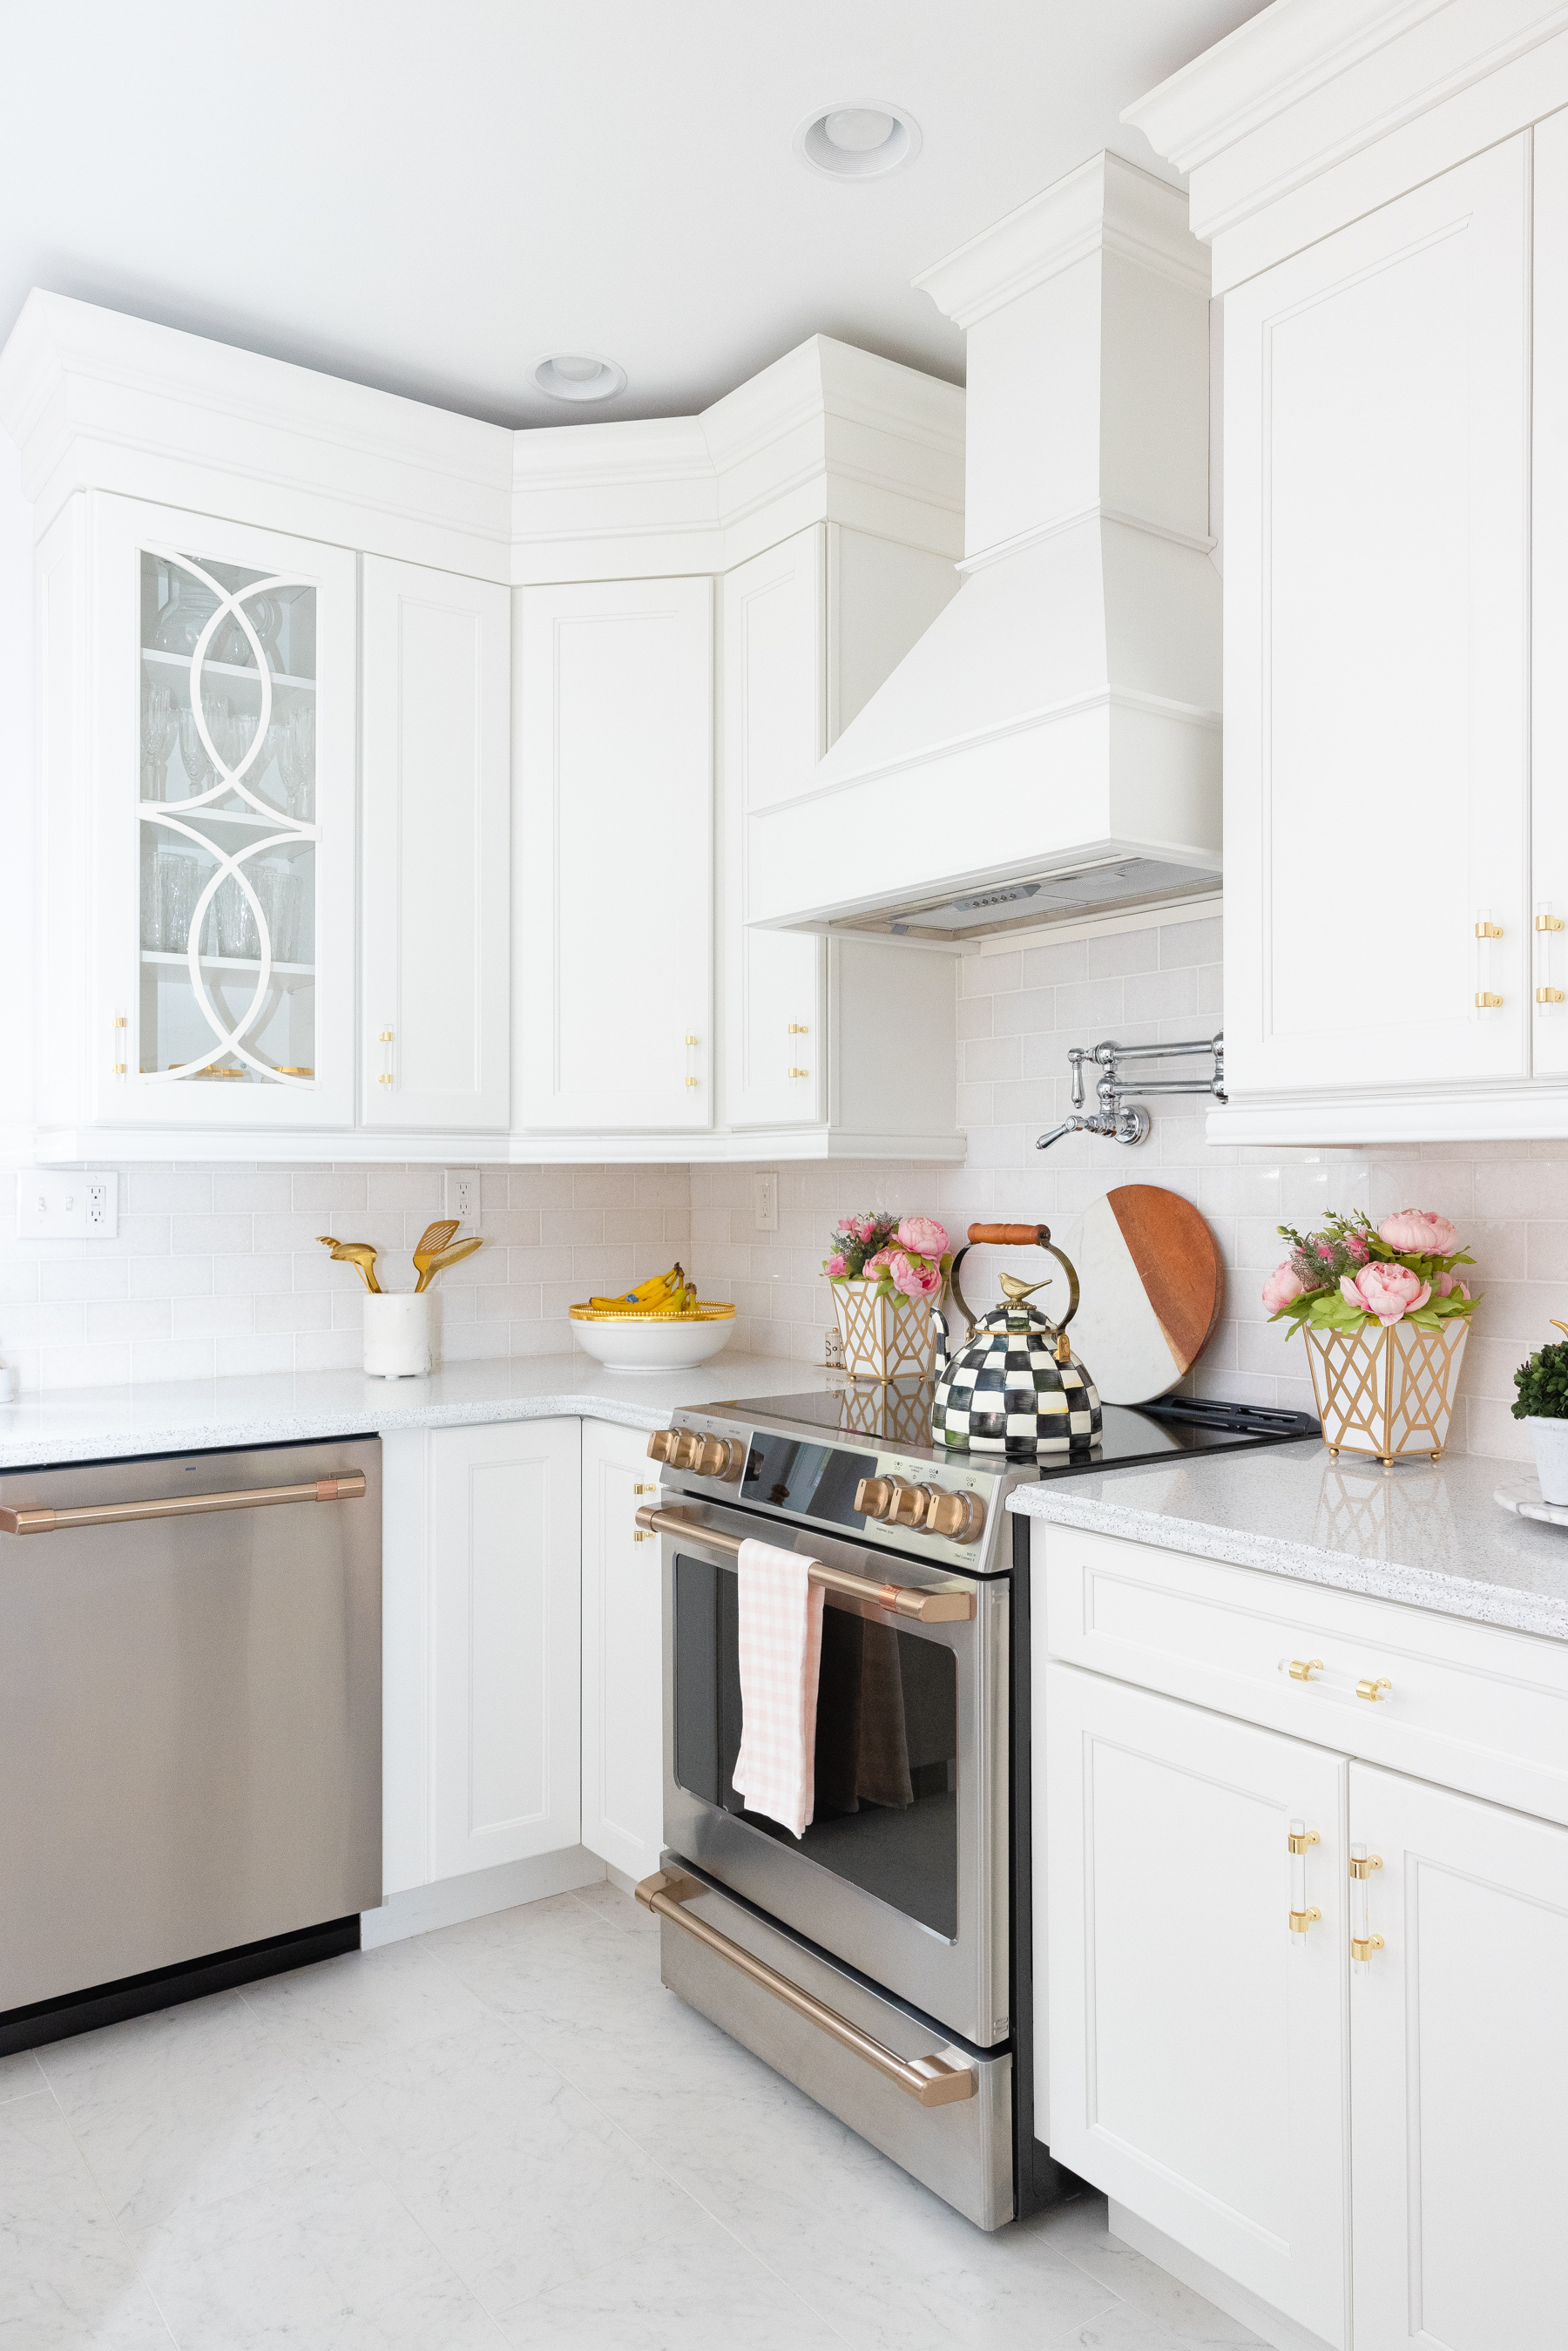 silver oven and white walls in the kitchen